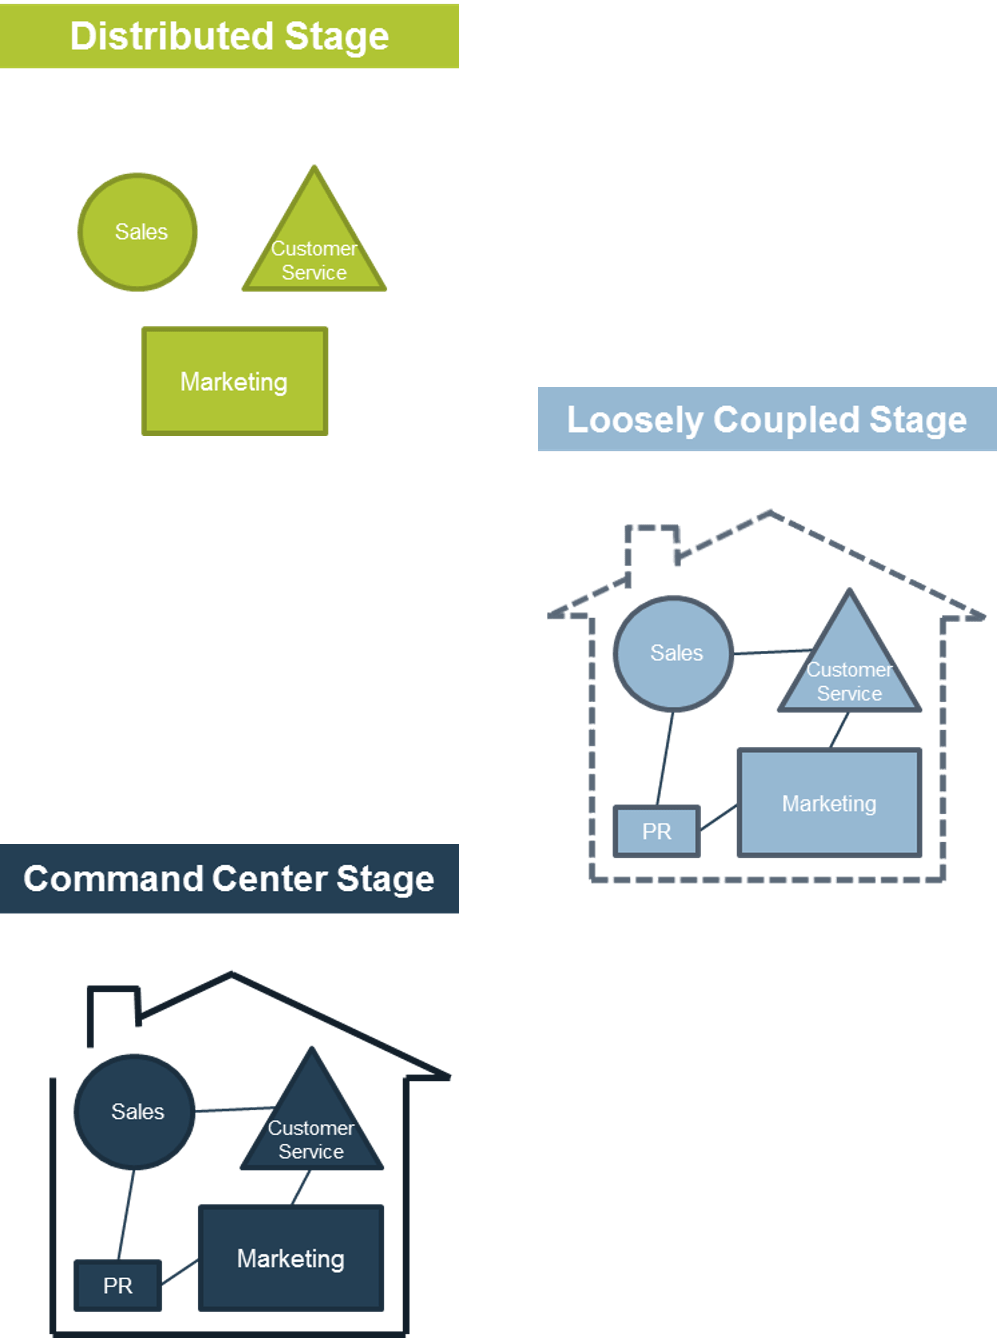 Three stages eventually leading to shapes in a house, 'Distributed Stage', 'Loosely Coupled Stage', and 'Command Center Stage'.